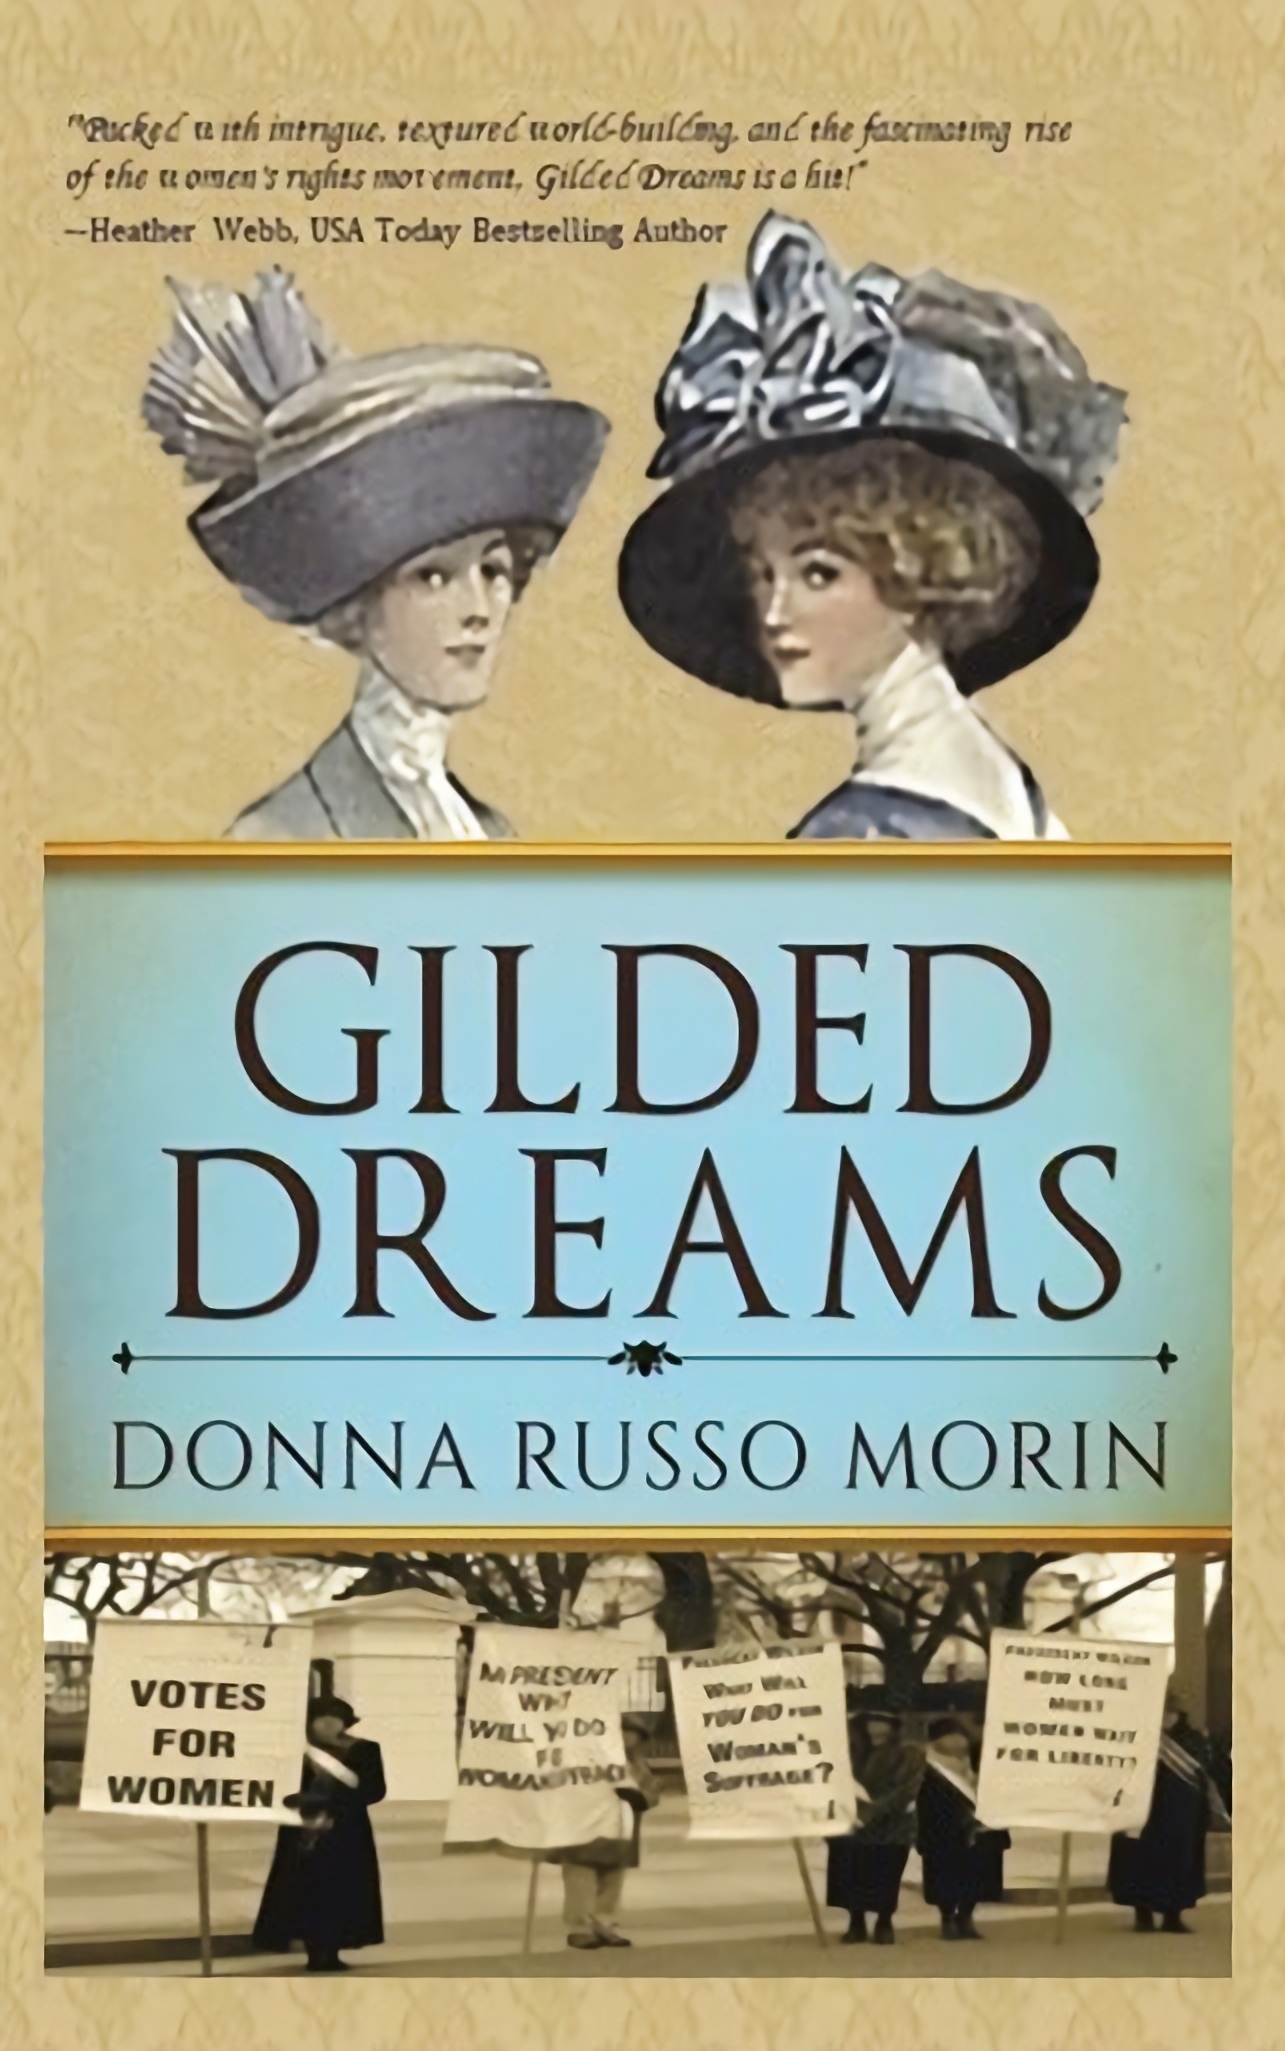 Interview with Donna Russo Morin, author of GILDED DREAMS